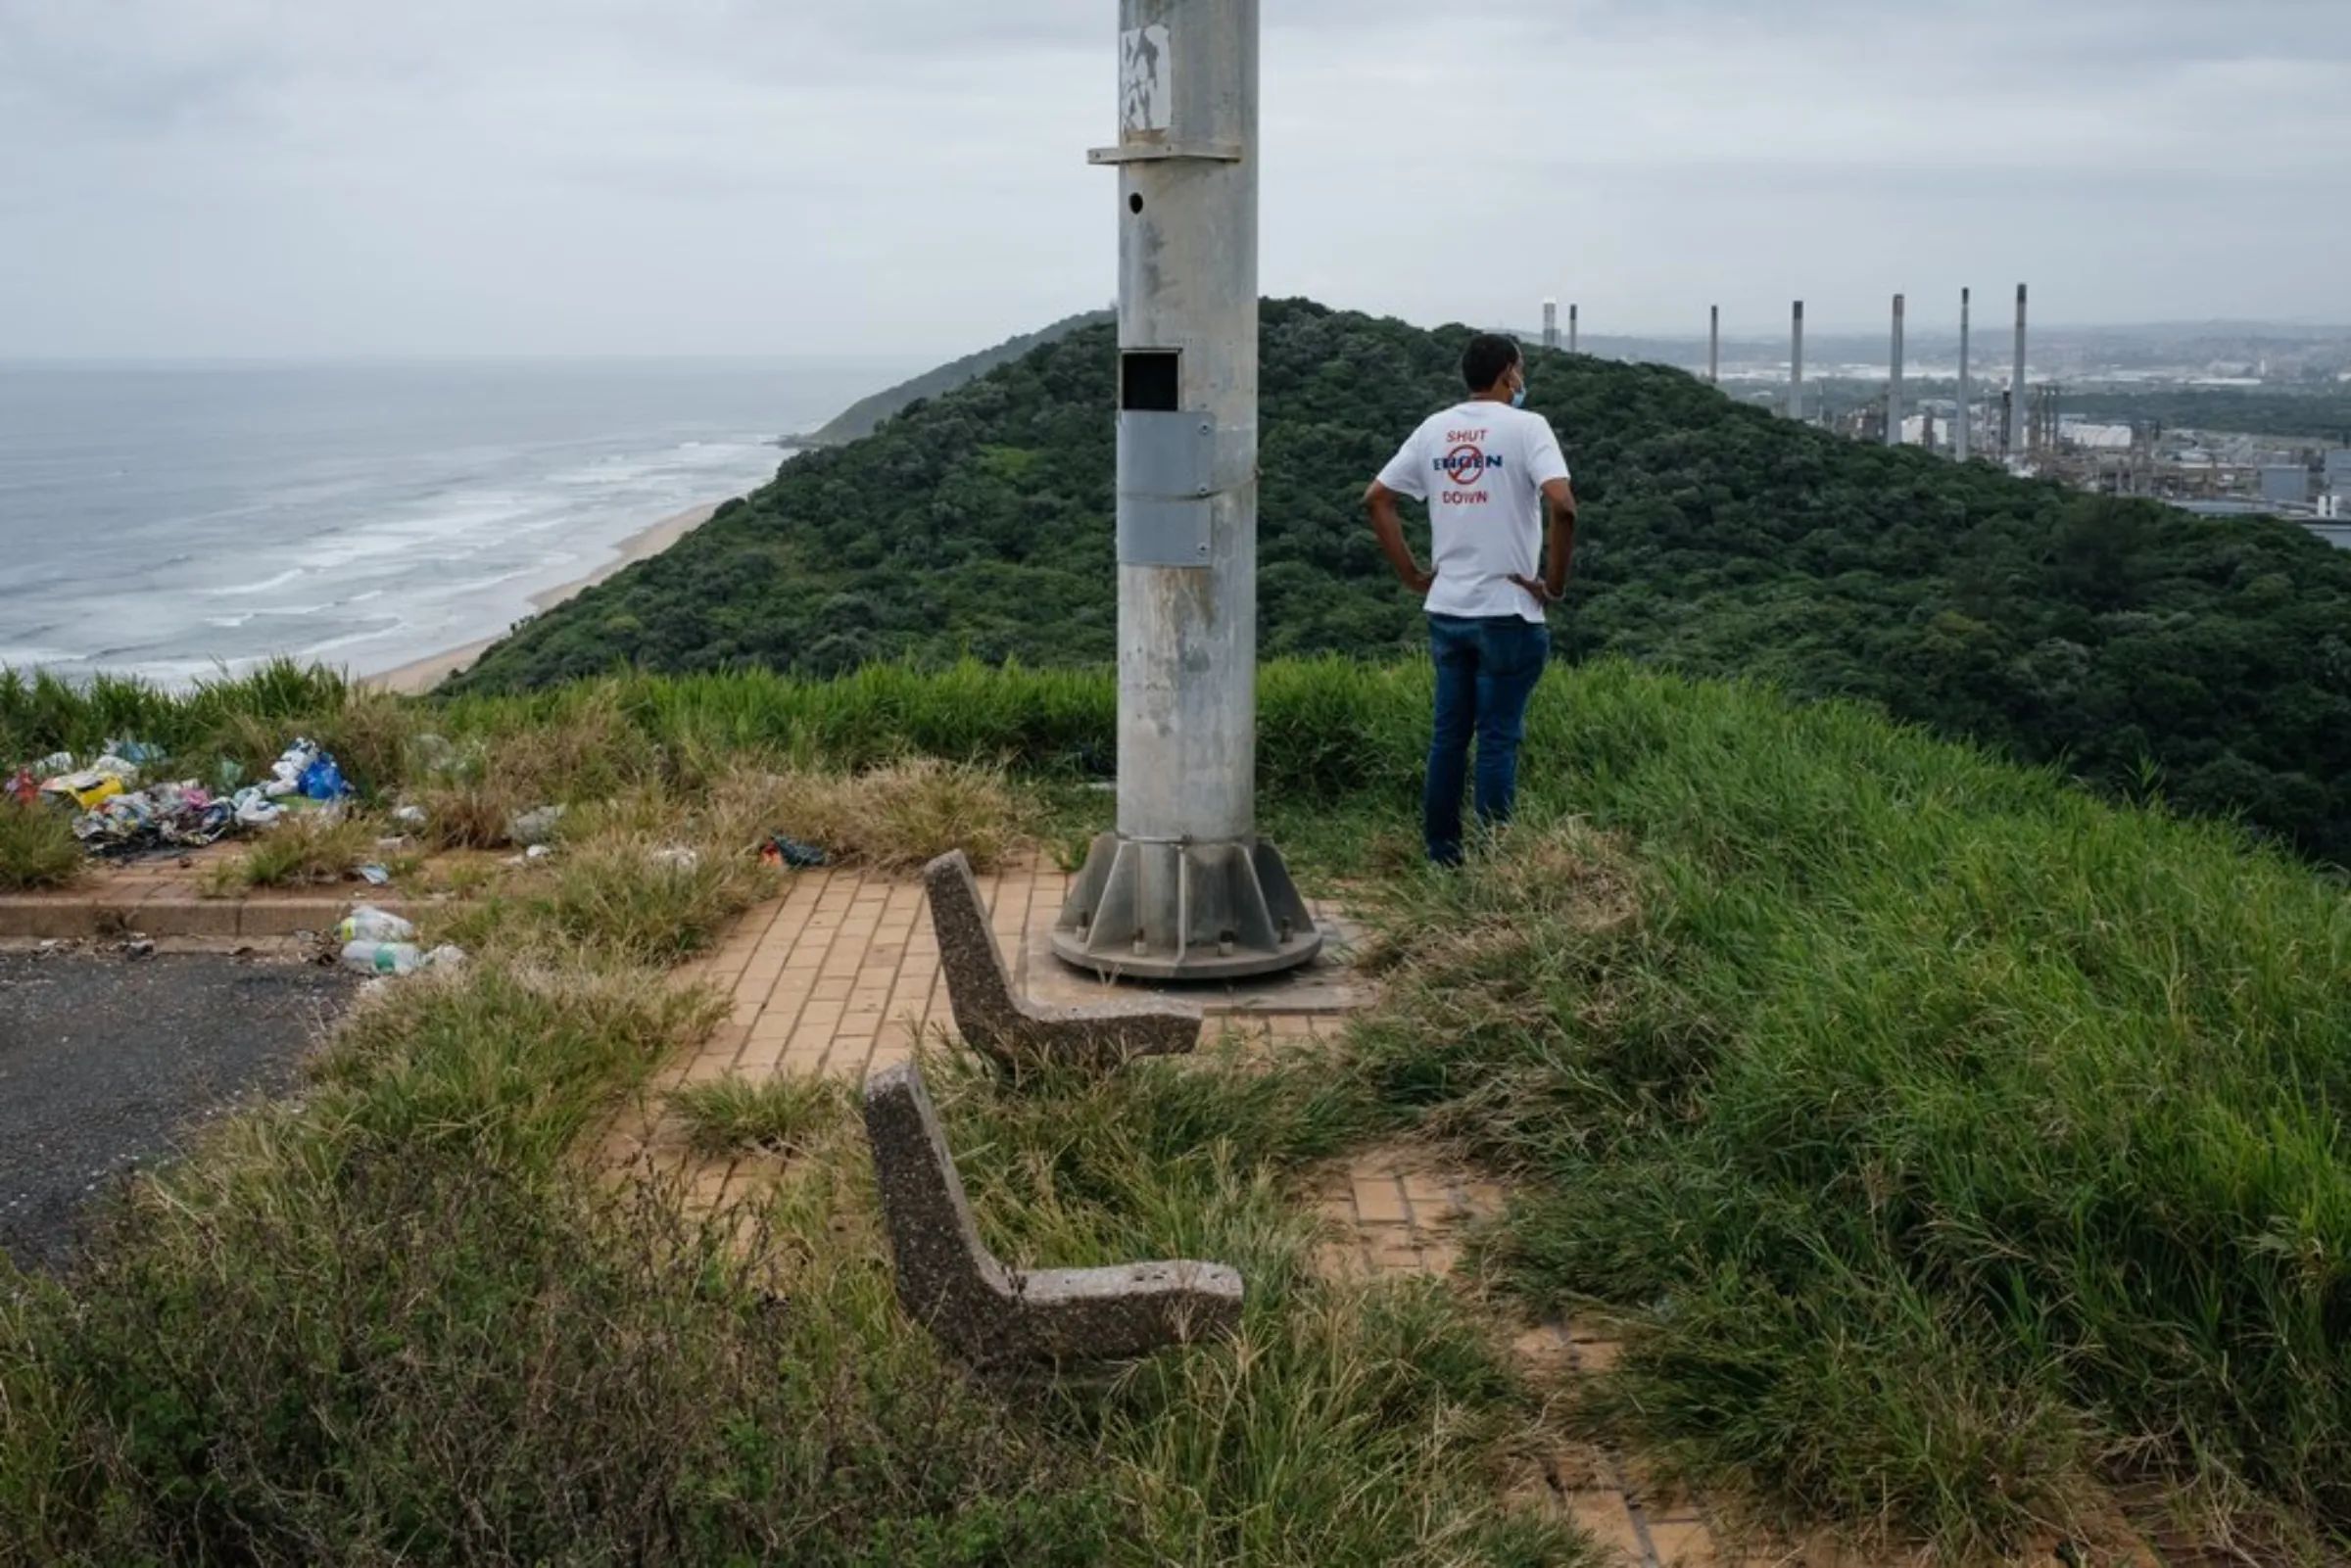 South Durban Community Environmental Alliance (SDCEA) coordinator Desmond D'Sa looks over the SAPREF oil refinery from a viewpoint in Durban, South Africa, April 1, 2021